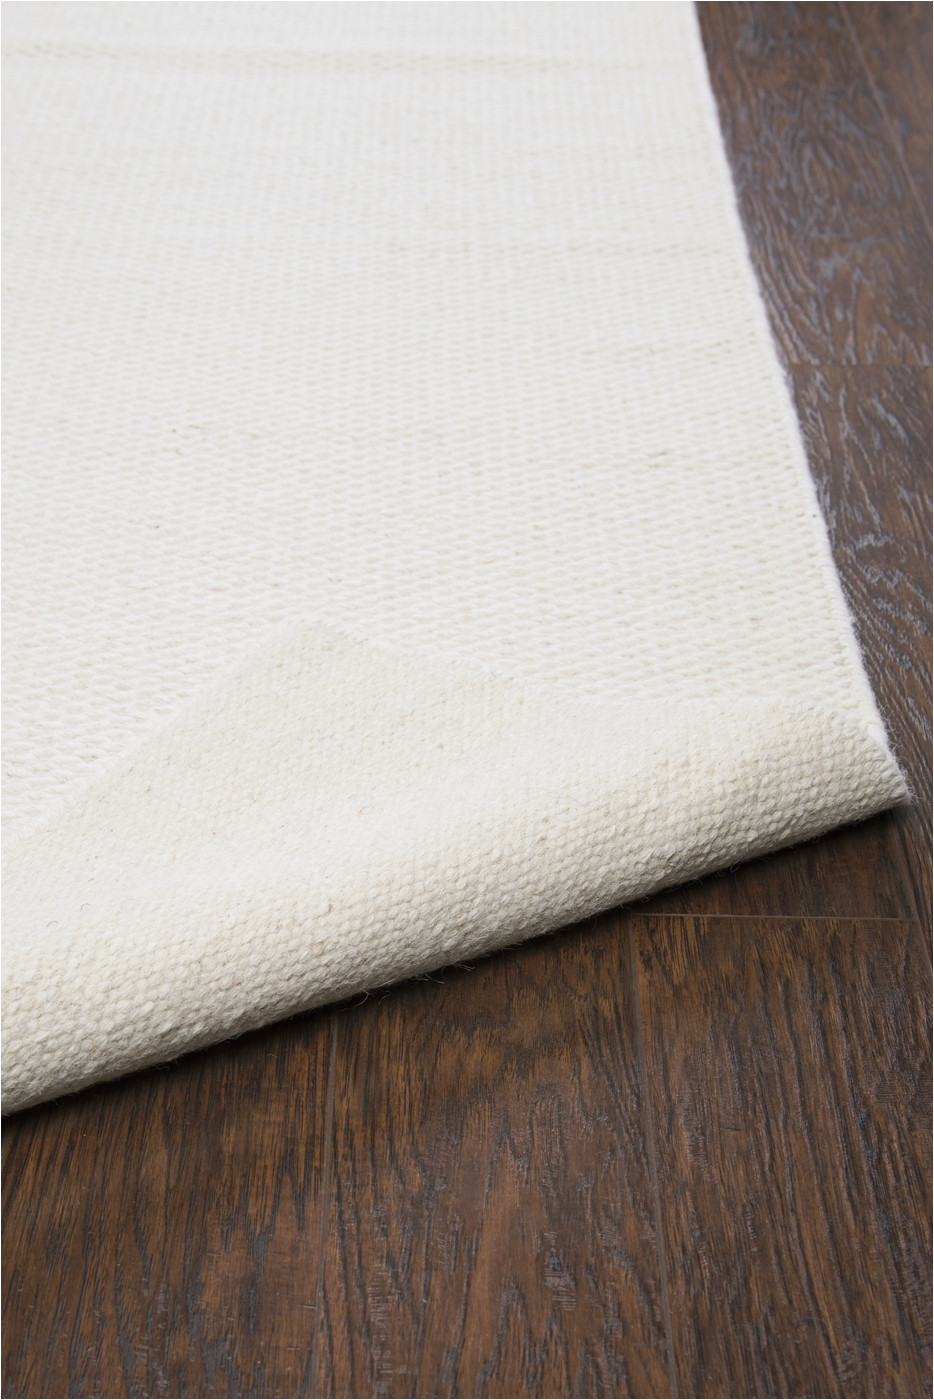 Off White area Rug 9×12 Twist Textured Woven Pattern Wool area Rug In solid Off